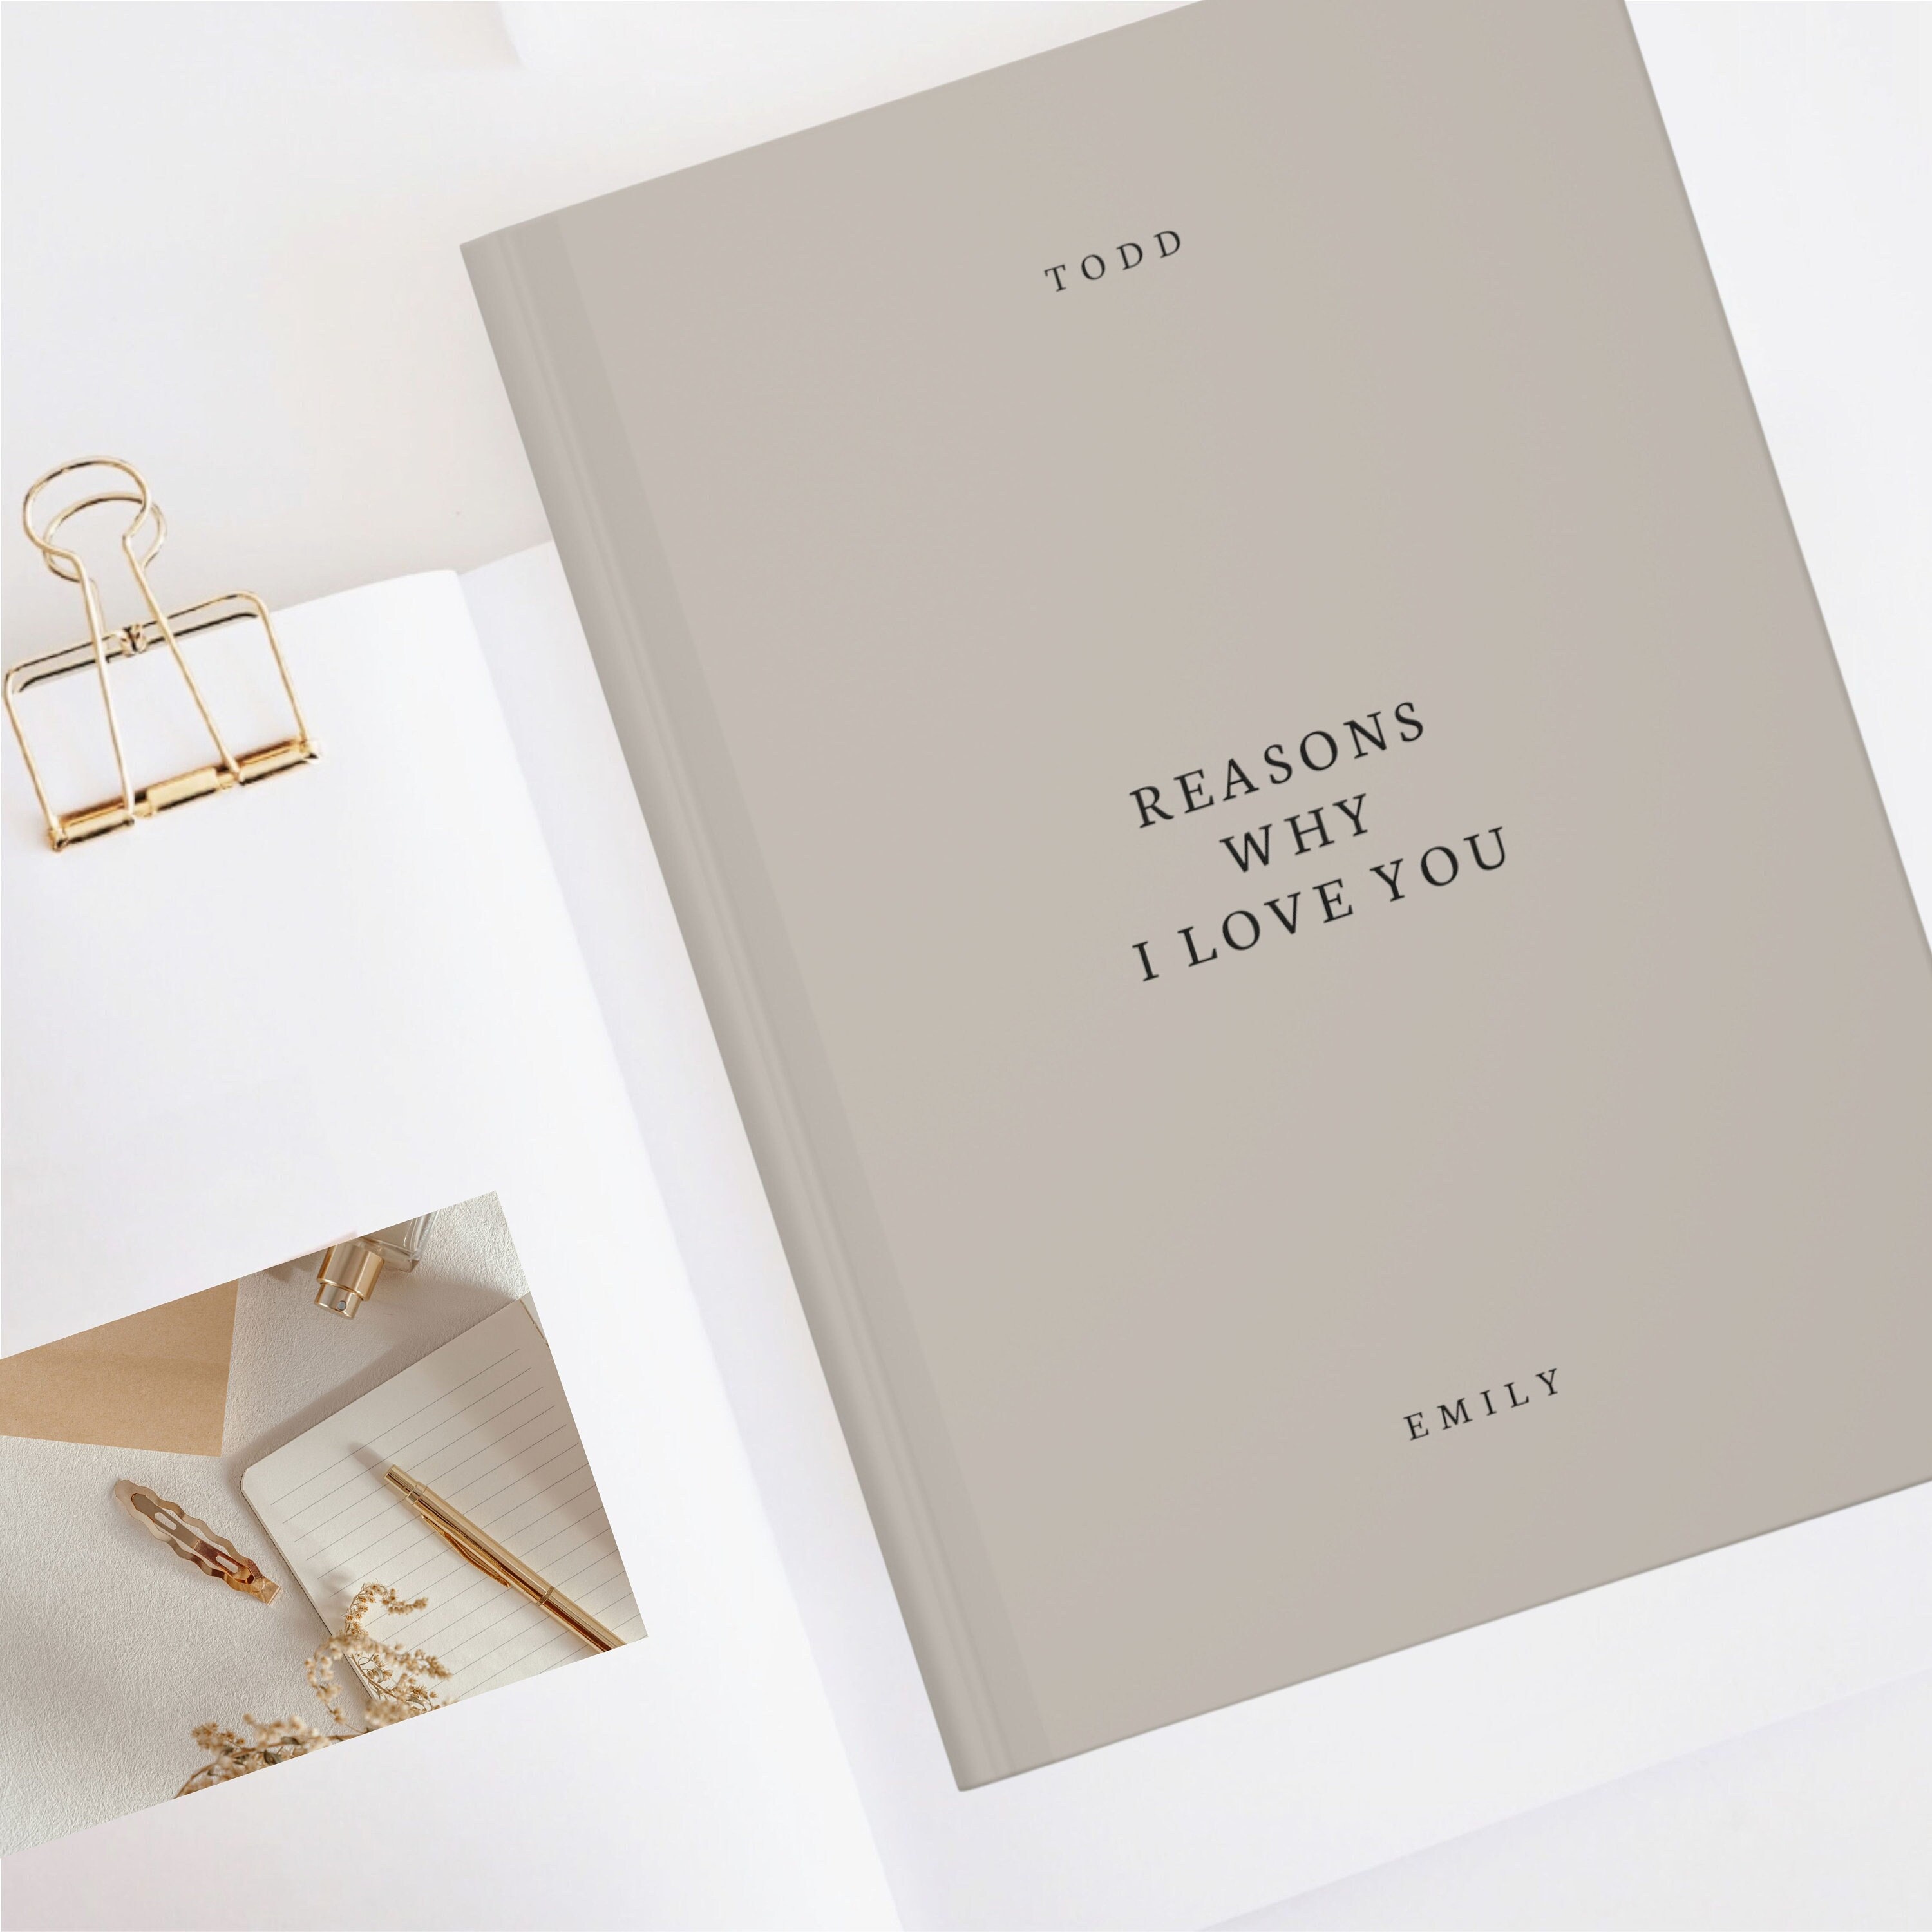 50 Reasons Why I Love You: What I Love About You book: Fill in the blank  with Naughty, Funny or Romantic Things You Love About Your Partner.